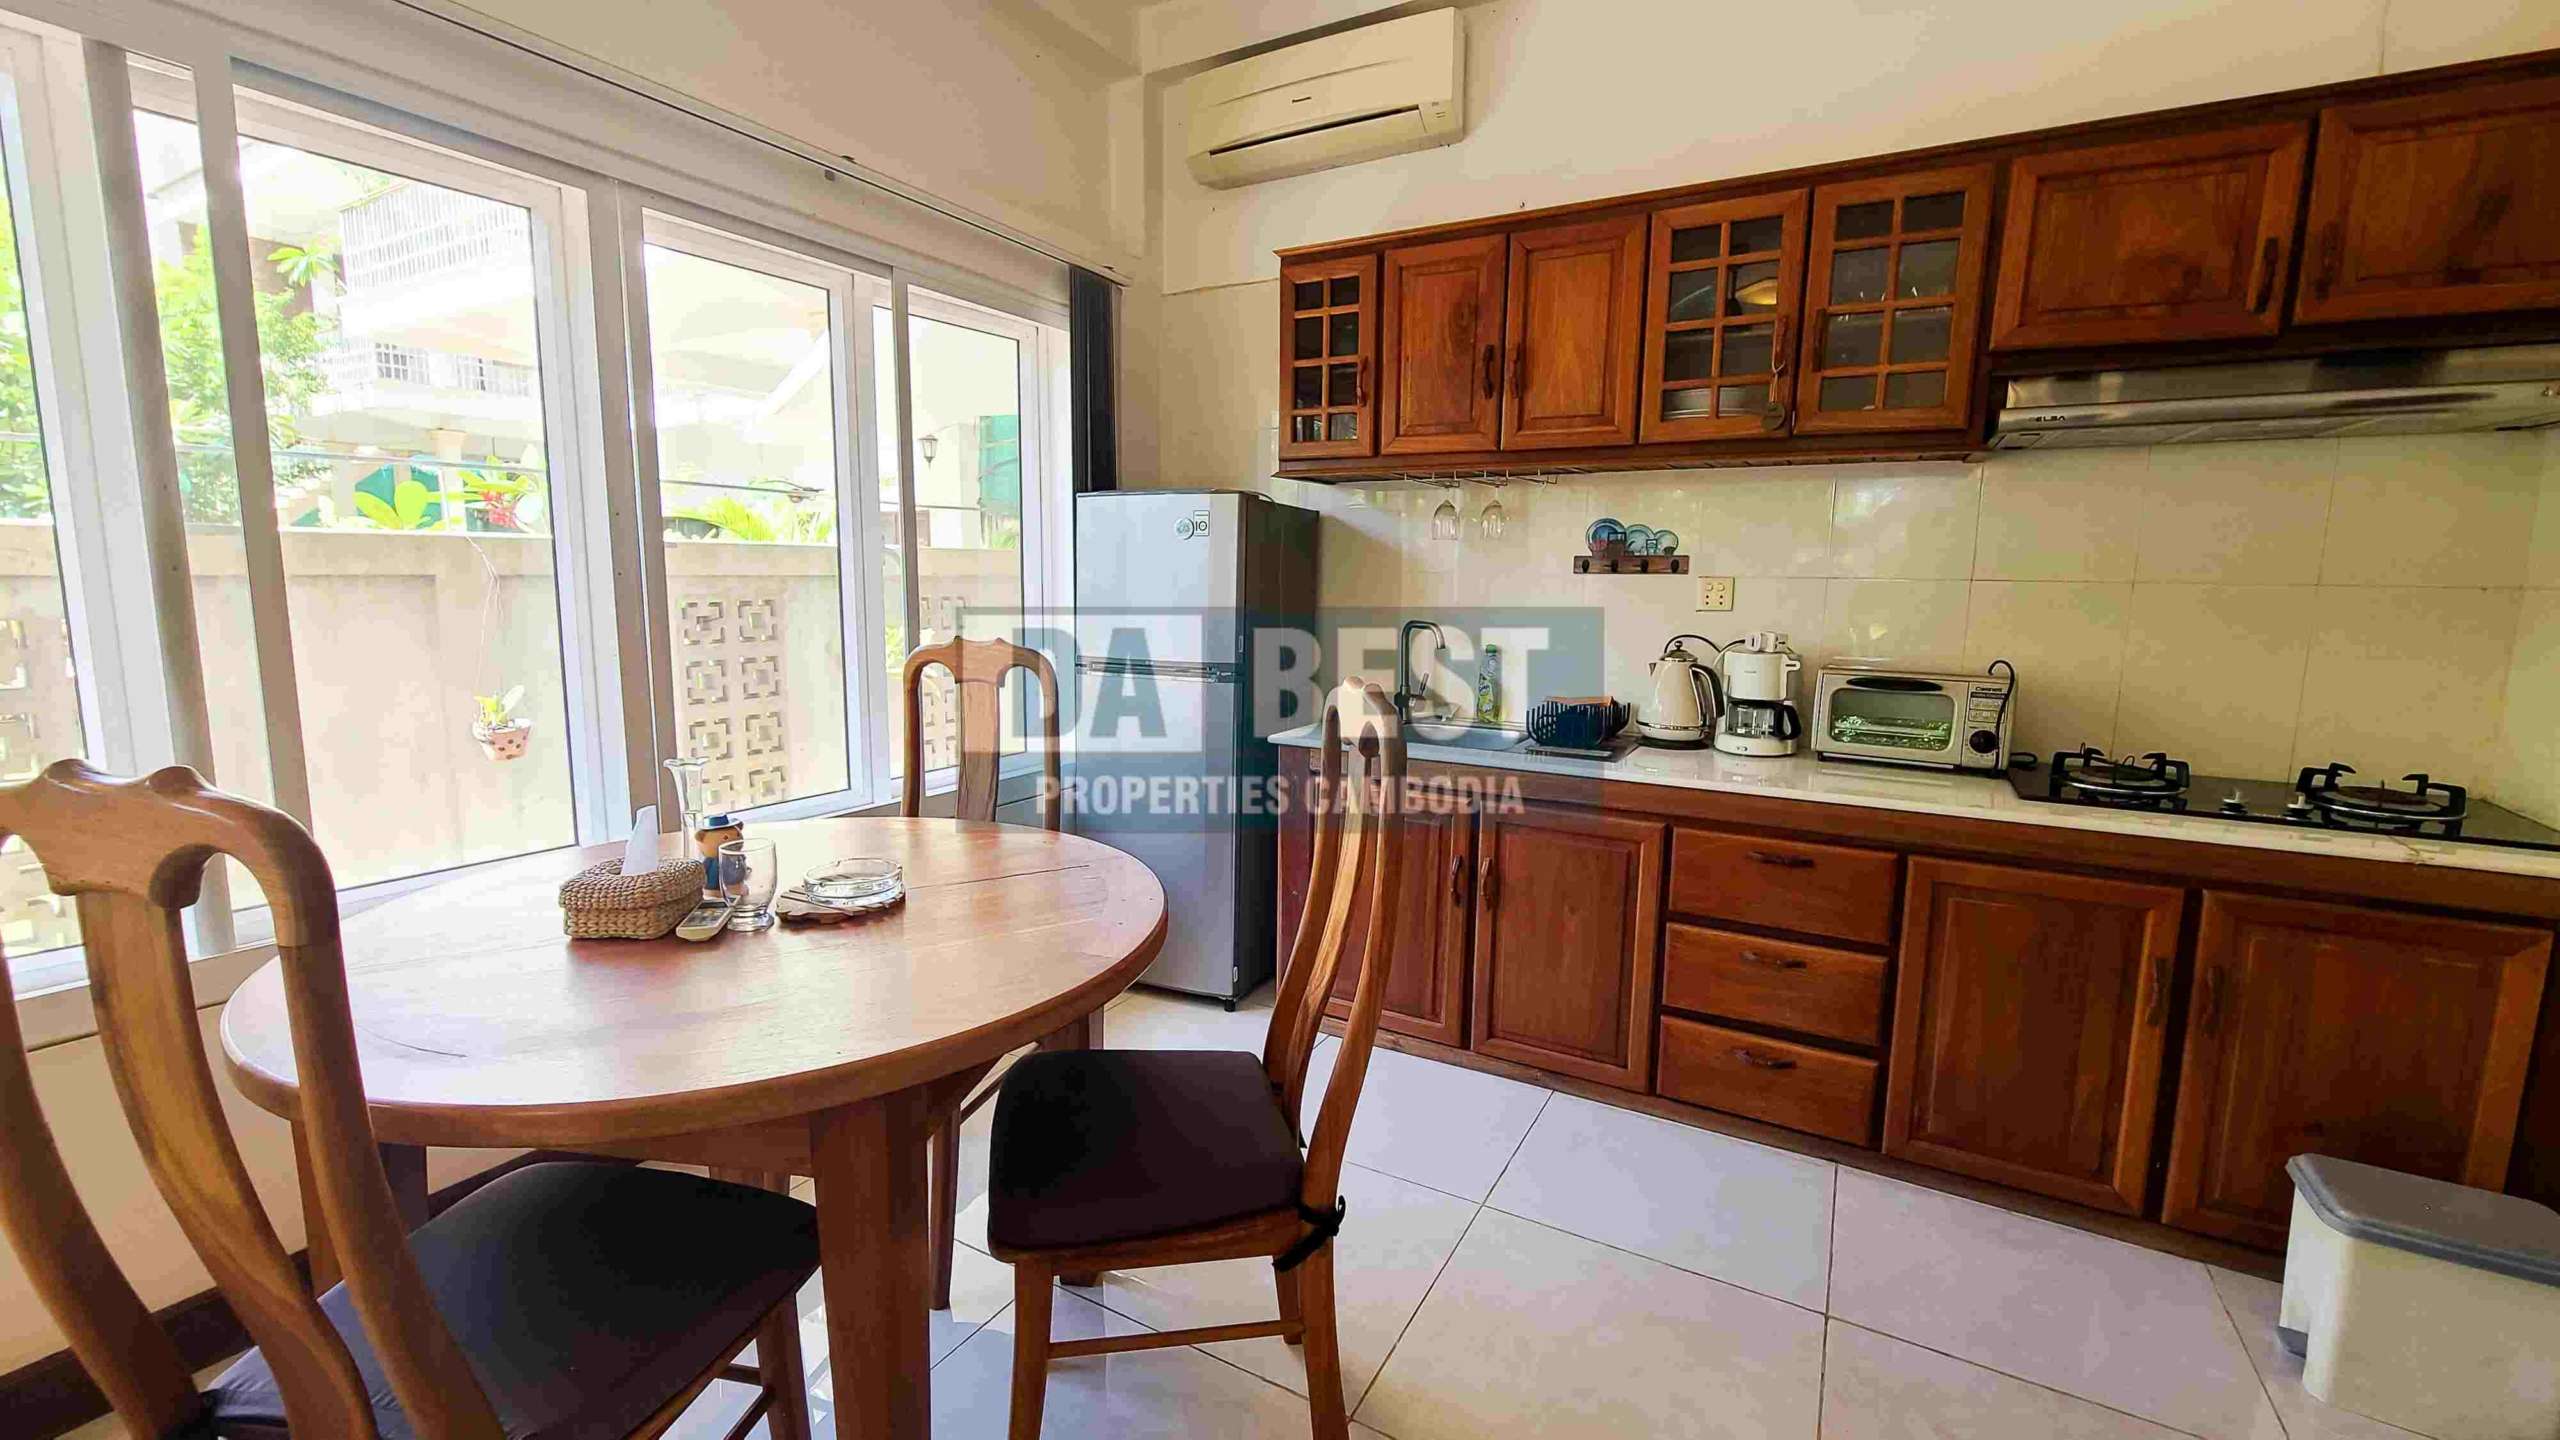 Modern Private Villa 4 Bedroom For Rent in Siem Reap - Kitchen area -1